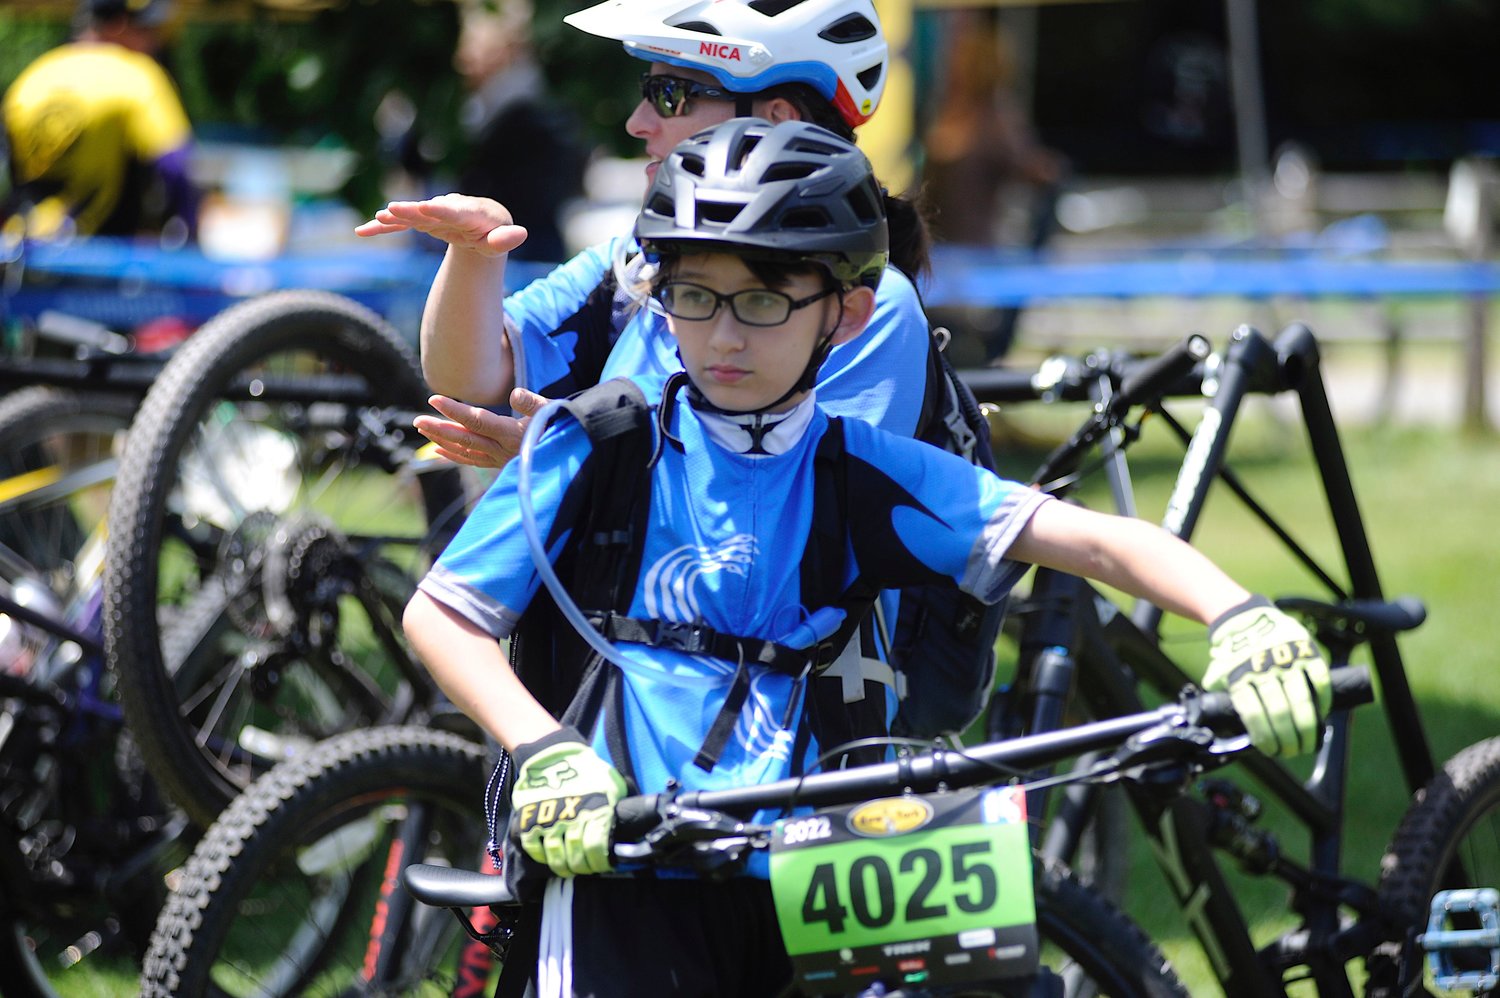 Set to ride. Phineas Laput, 11, of Eldred Central School placed 18th in the sixth grade boys’ race. He rides for the Catskills Claws Mountain Bike Team. For an online sidebar about this local composite team, visit www.riverreporter.com/sports.